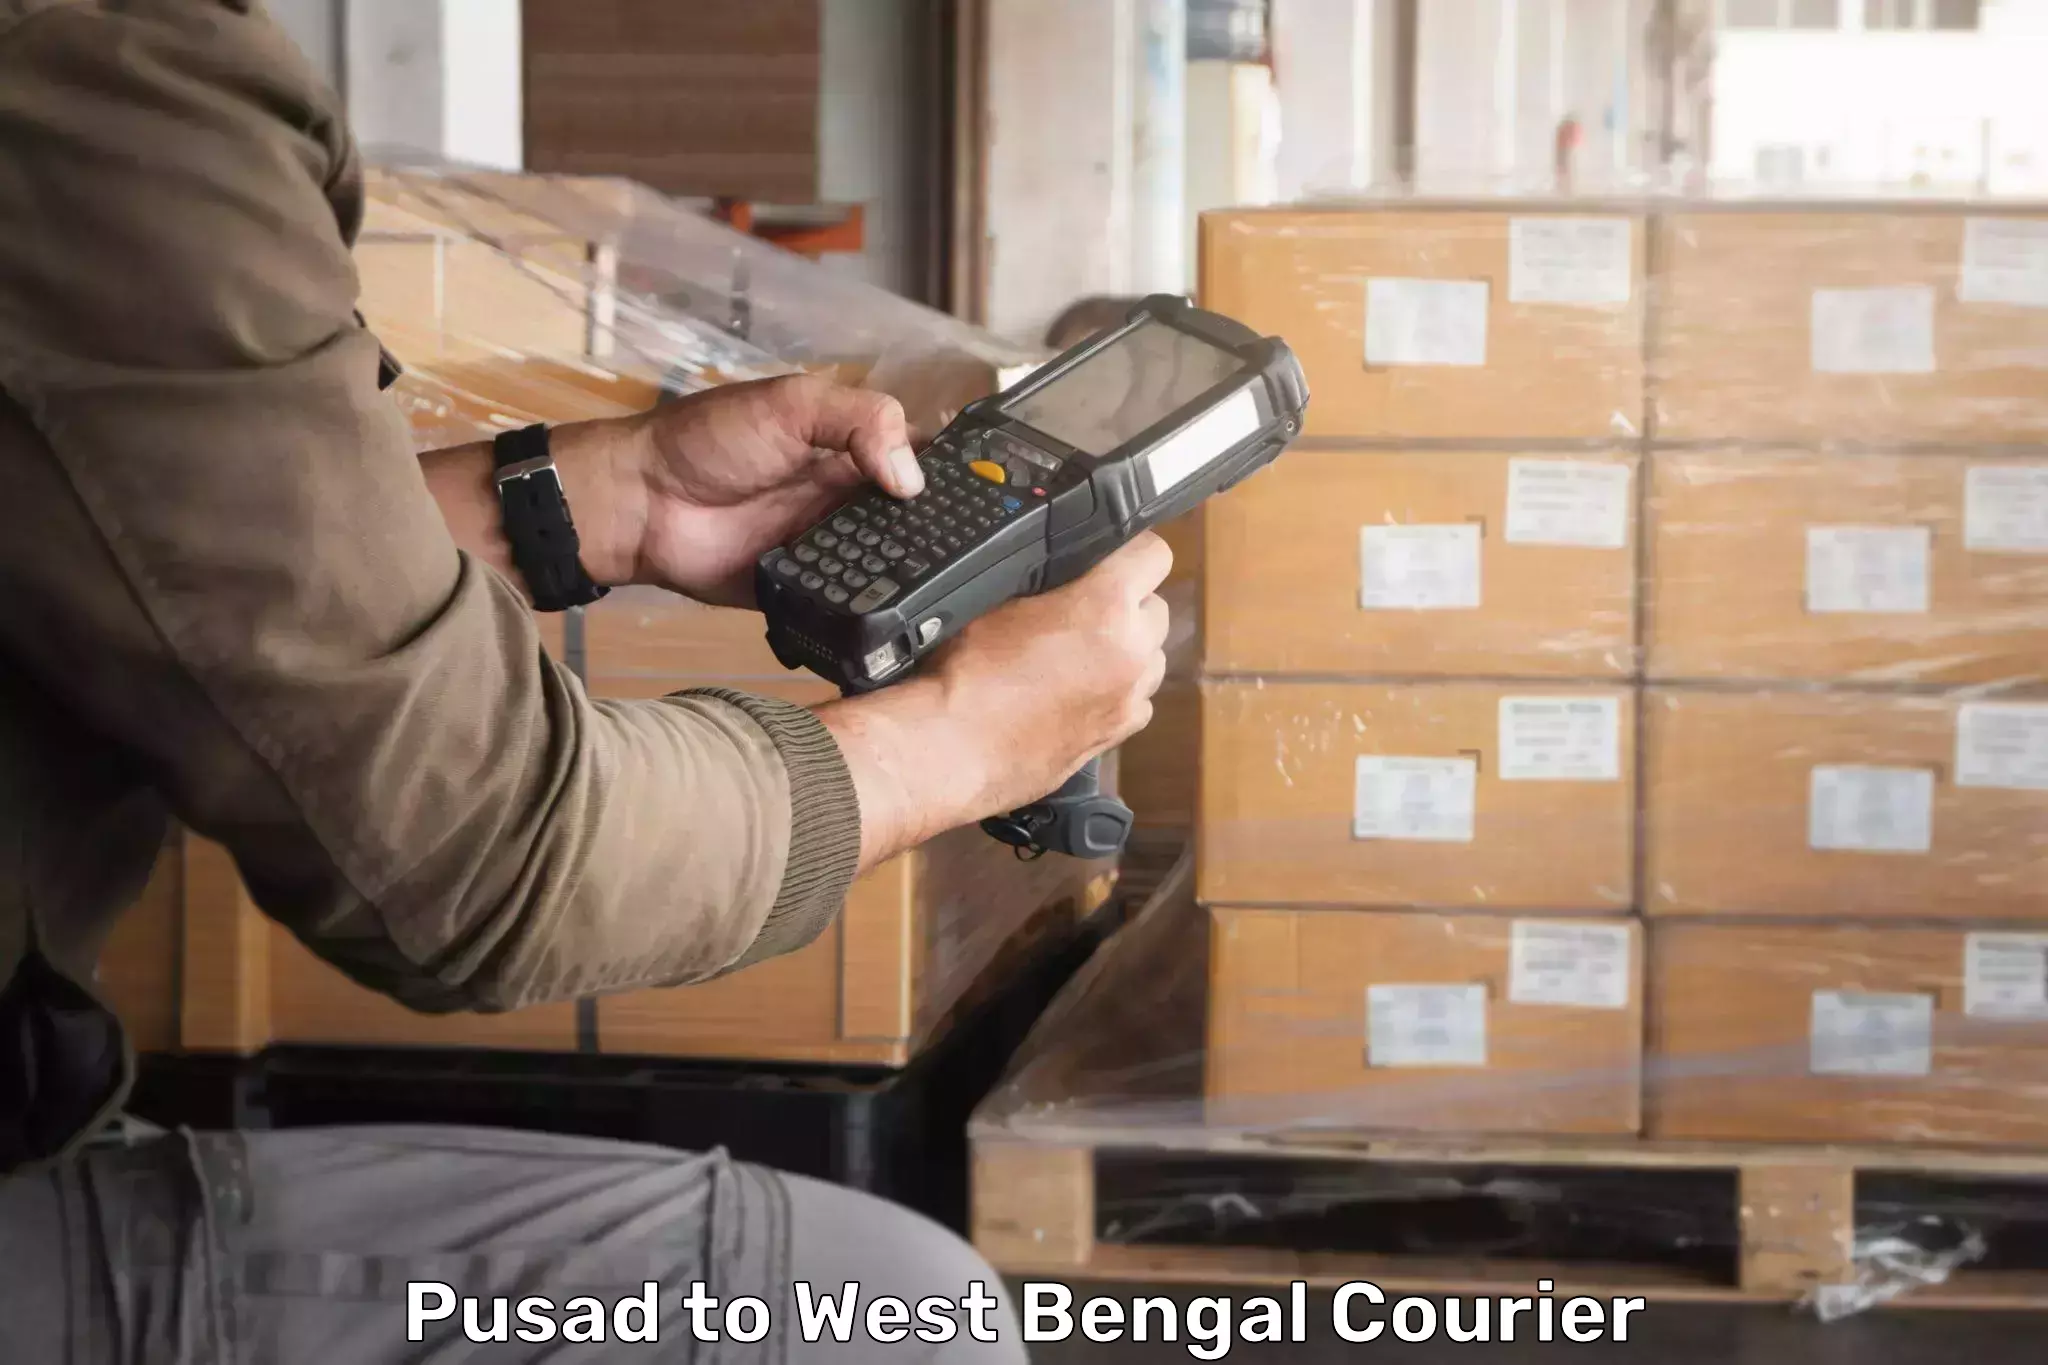 International courier networks Pusad to Alipore